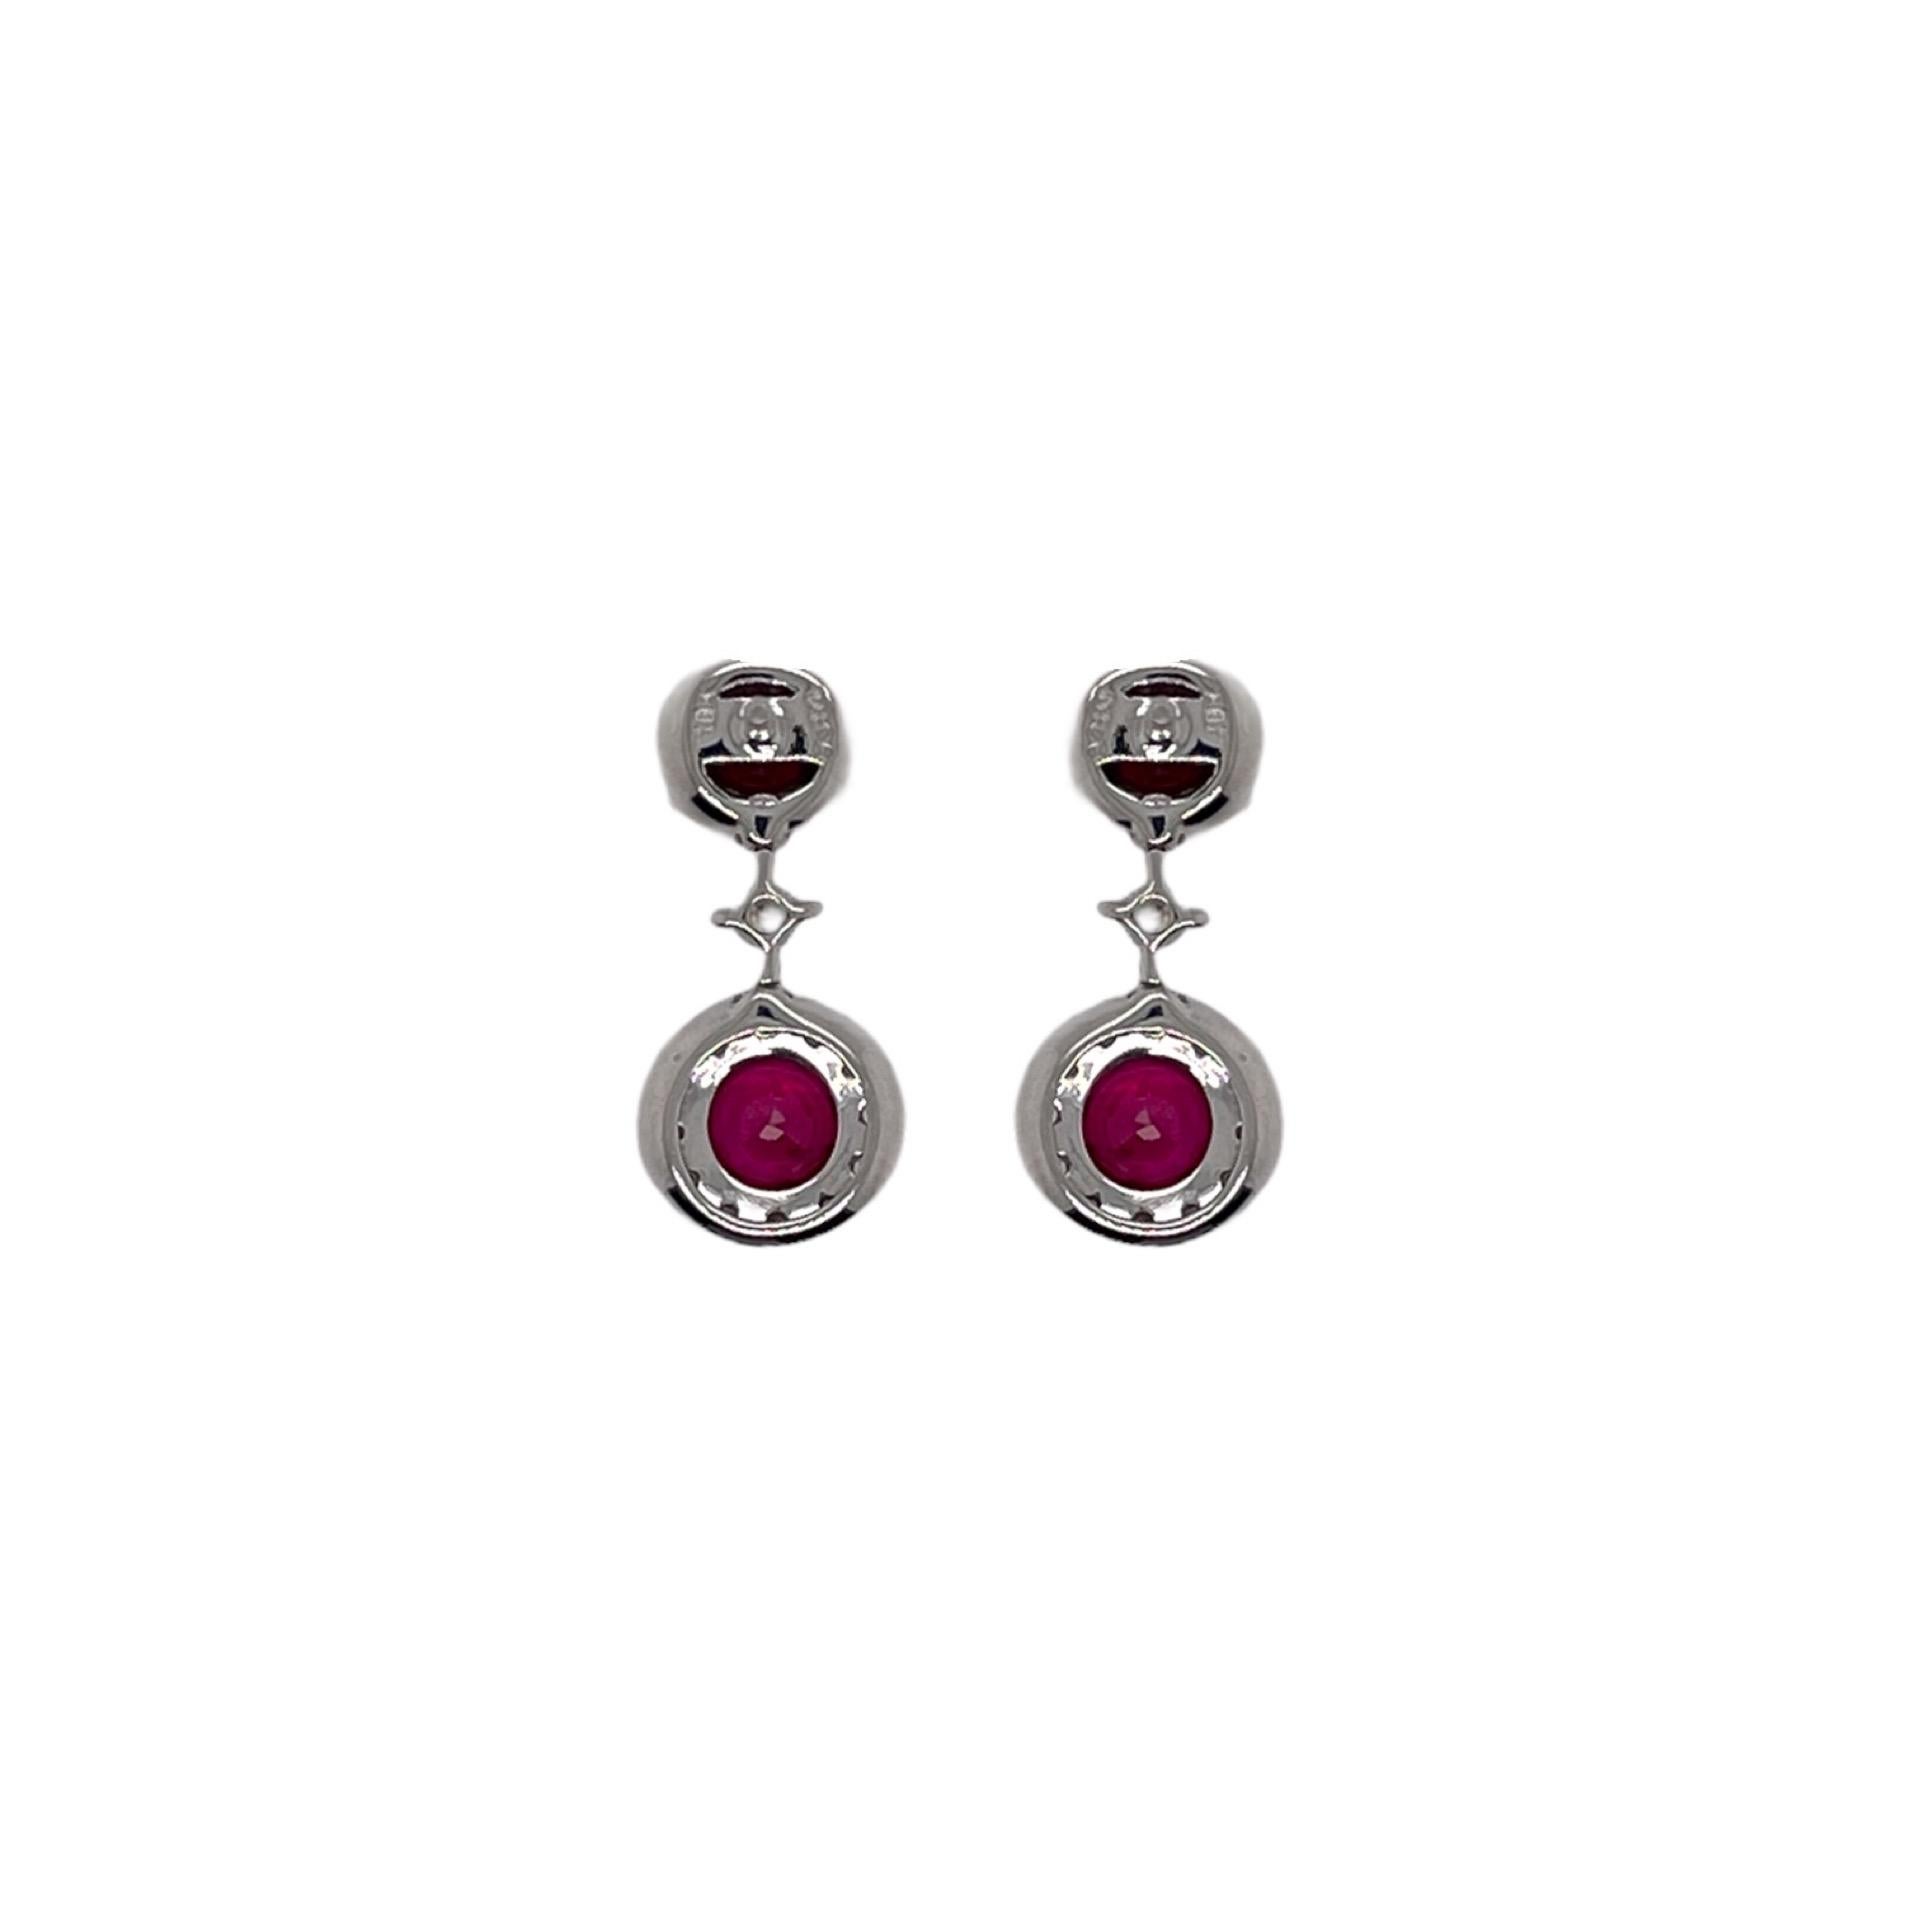 Contemporary Round Ruby & Diamond Drop Earrings in 18K White Gold